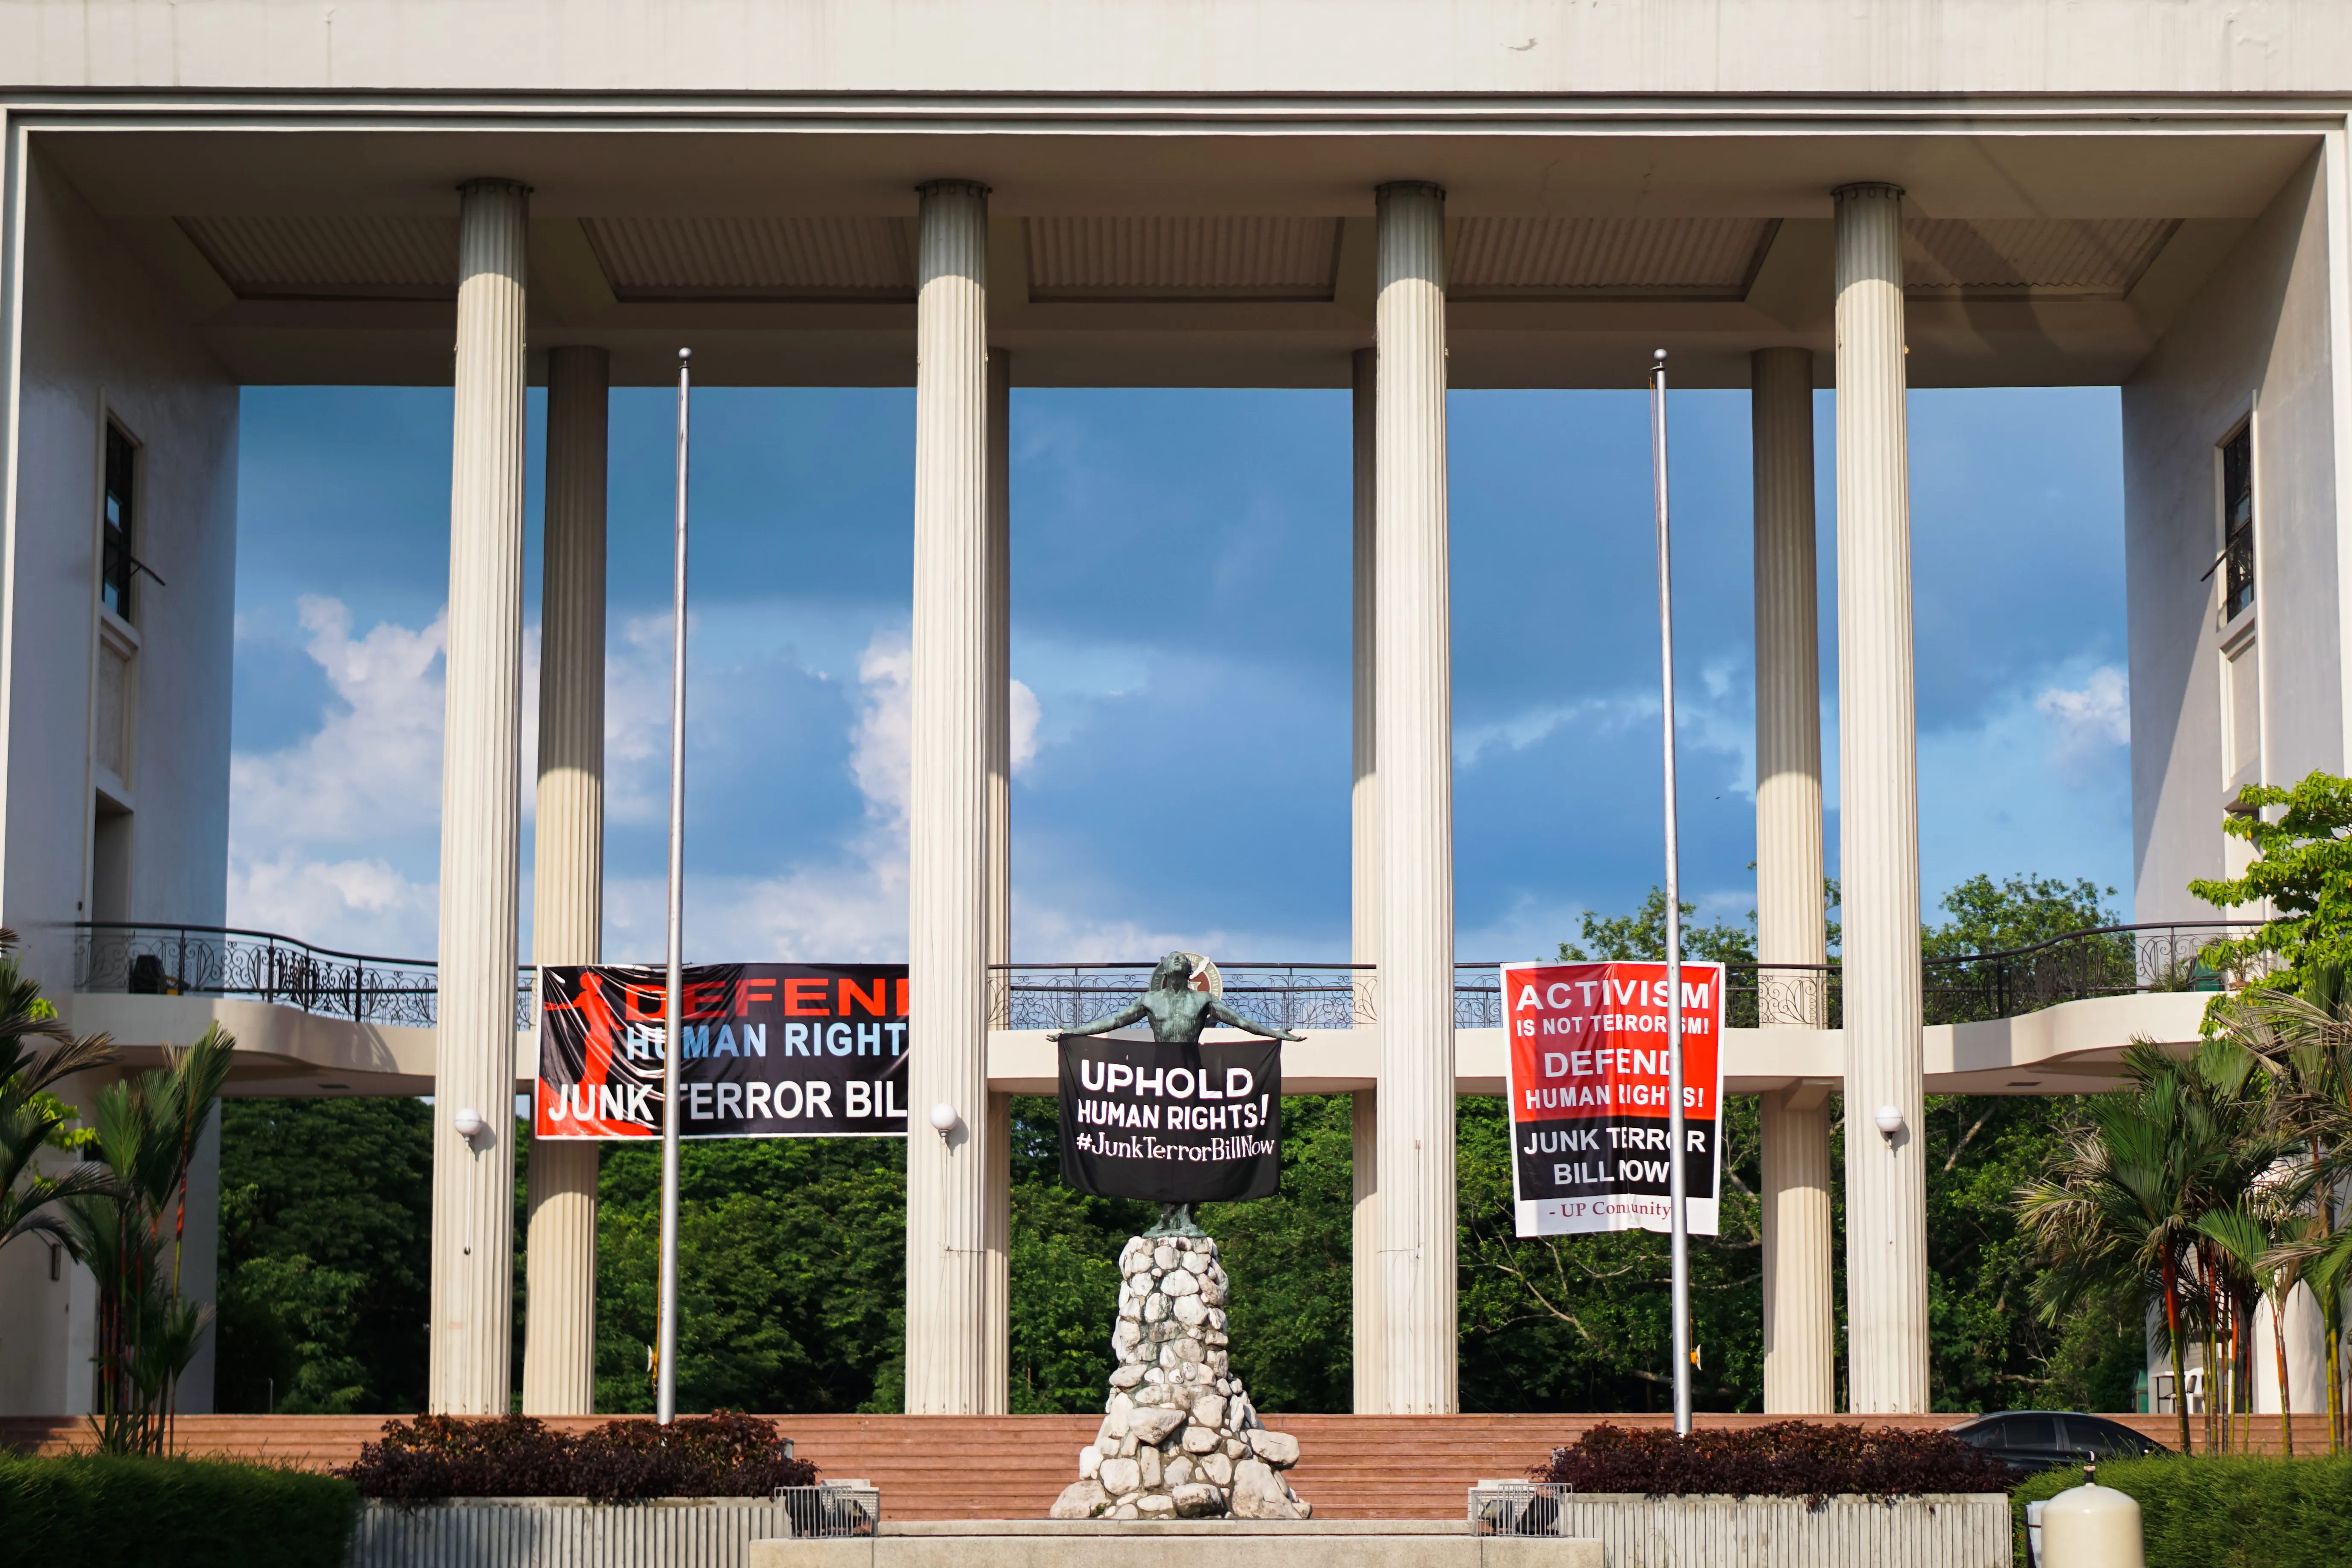 A display opposing the passage of the anti-terrorism law under which the nuns have been charged, at the University of the Philippines in Quezon City, June 17, 2020.?w=200&h=150